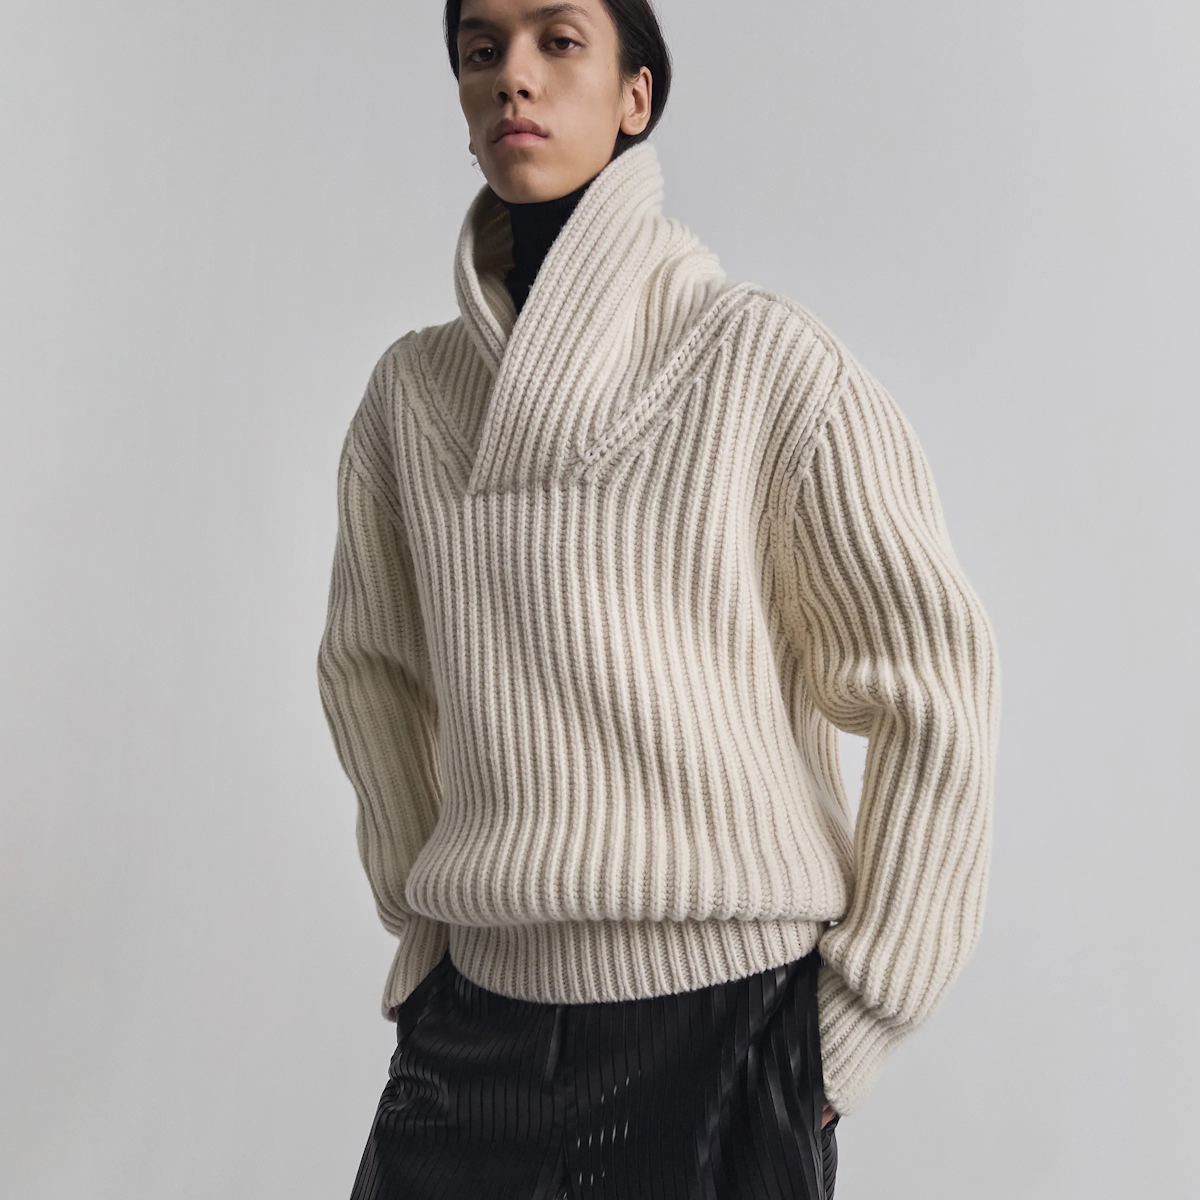 7 Must-Have Pieces from Drop Two of Phoebe Philo's Eponymous Label